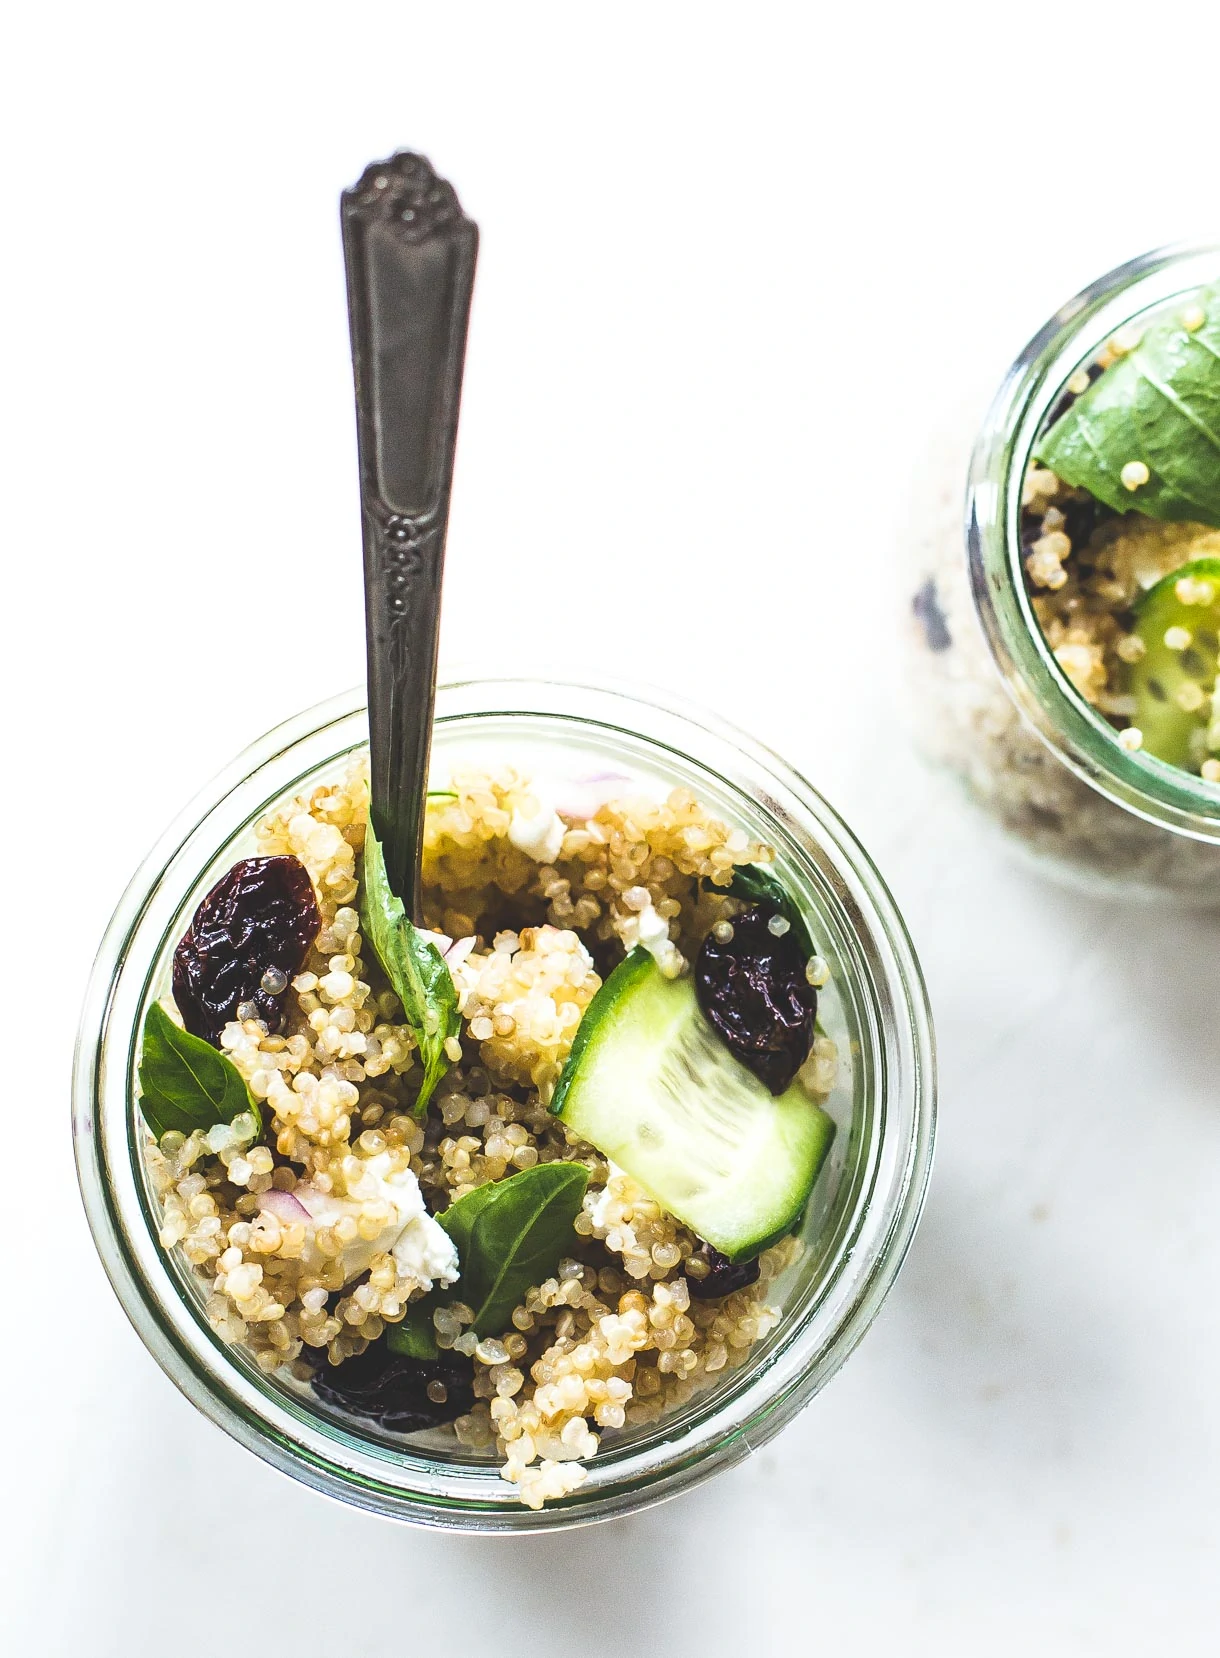 Basil Cucumber Quinoa Picnic Salad Jars {with a light, lemony dressing, dried cherries, and goat cheese}